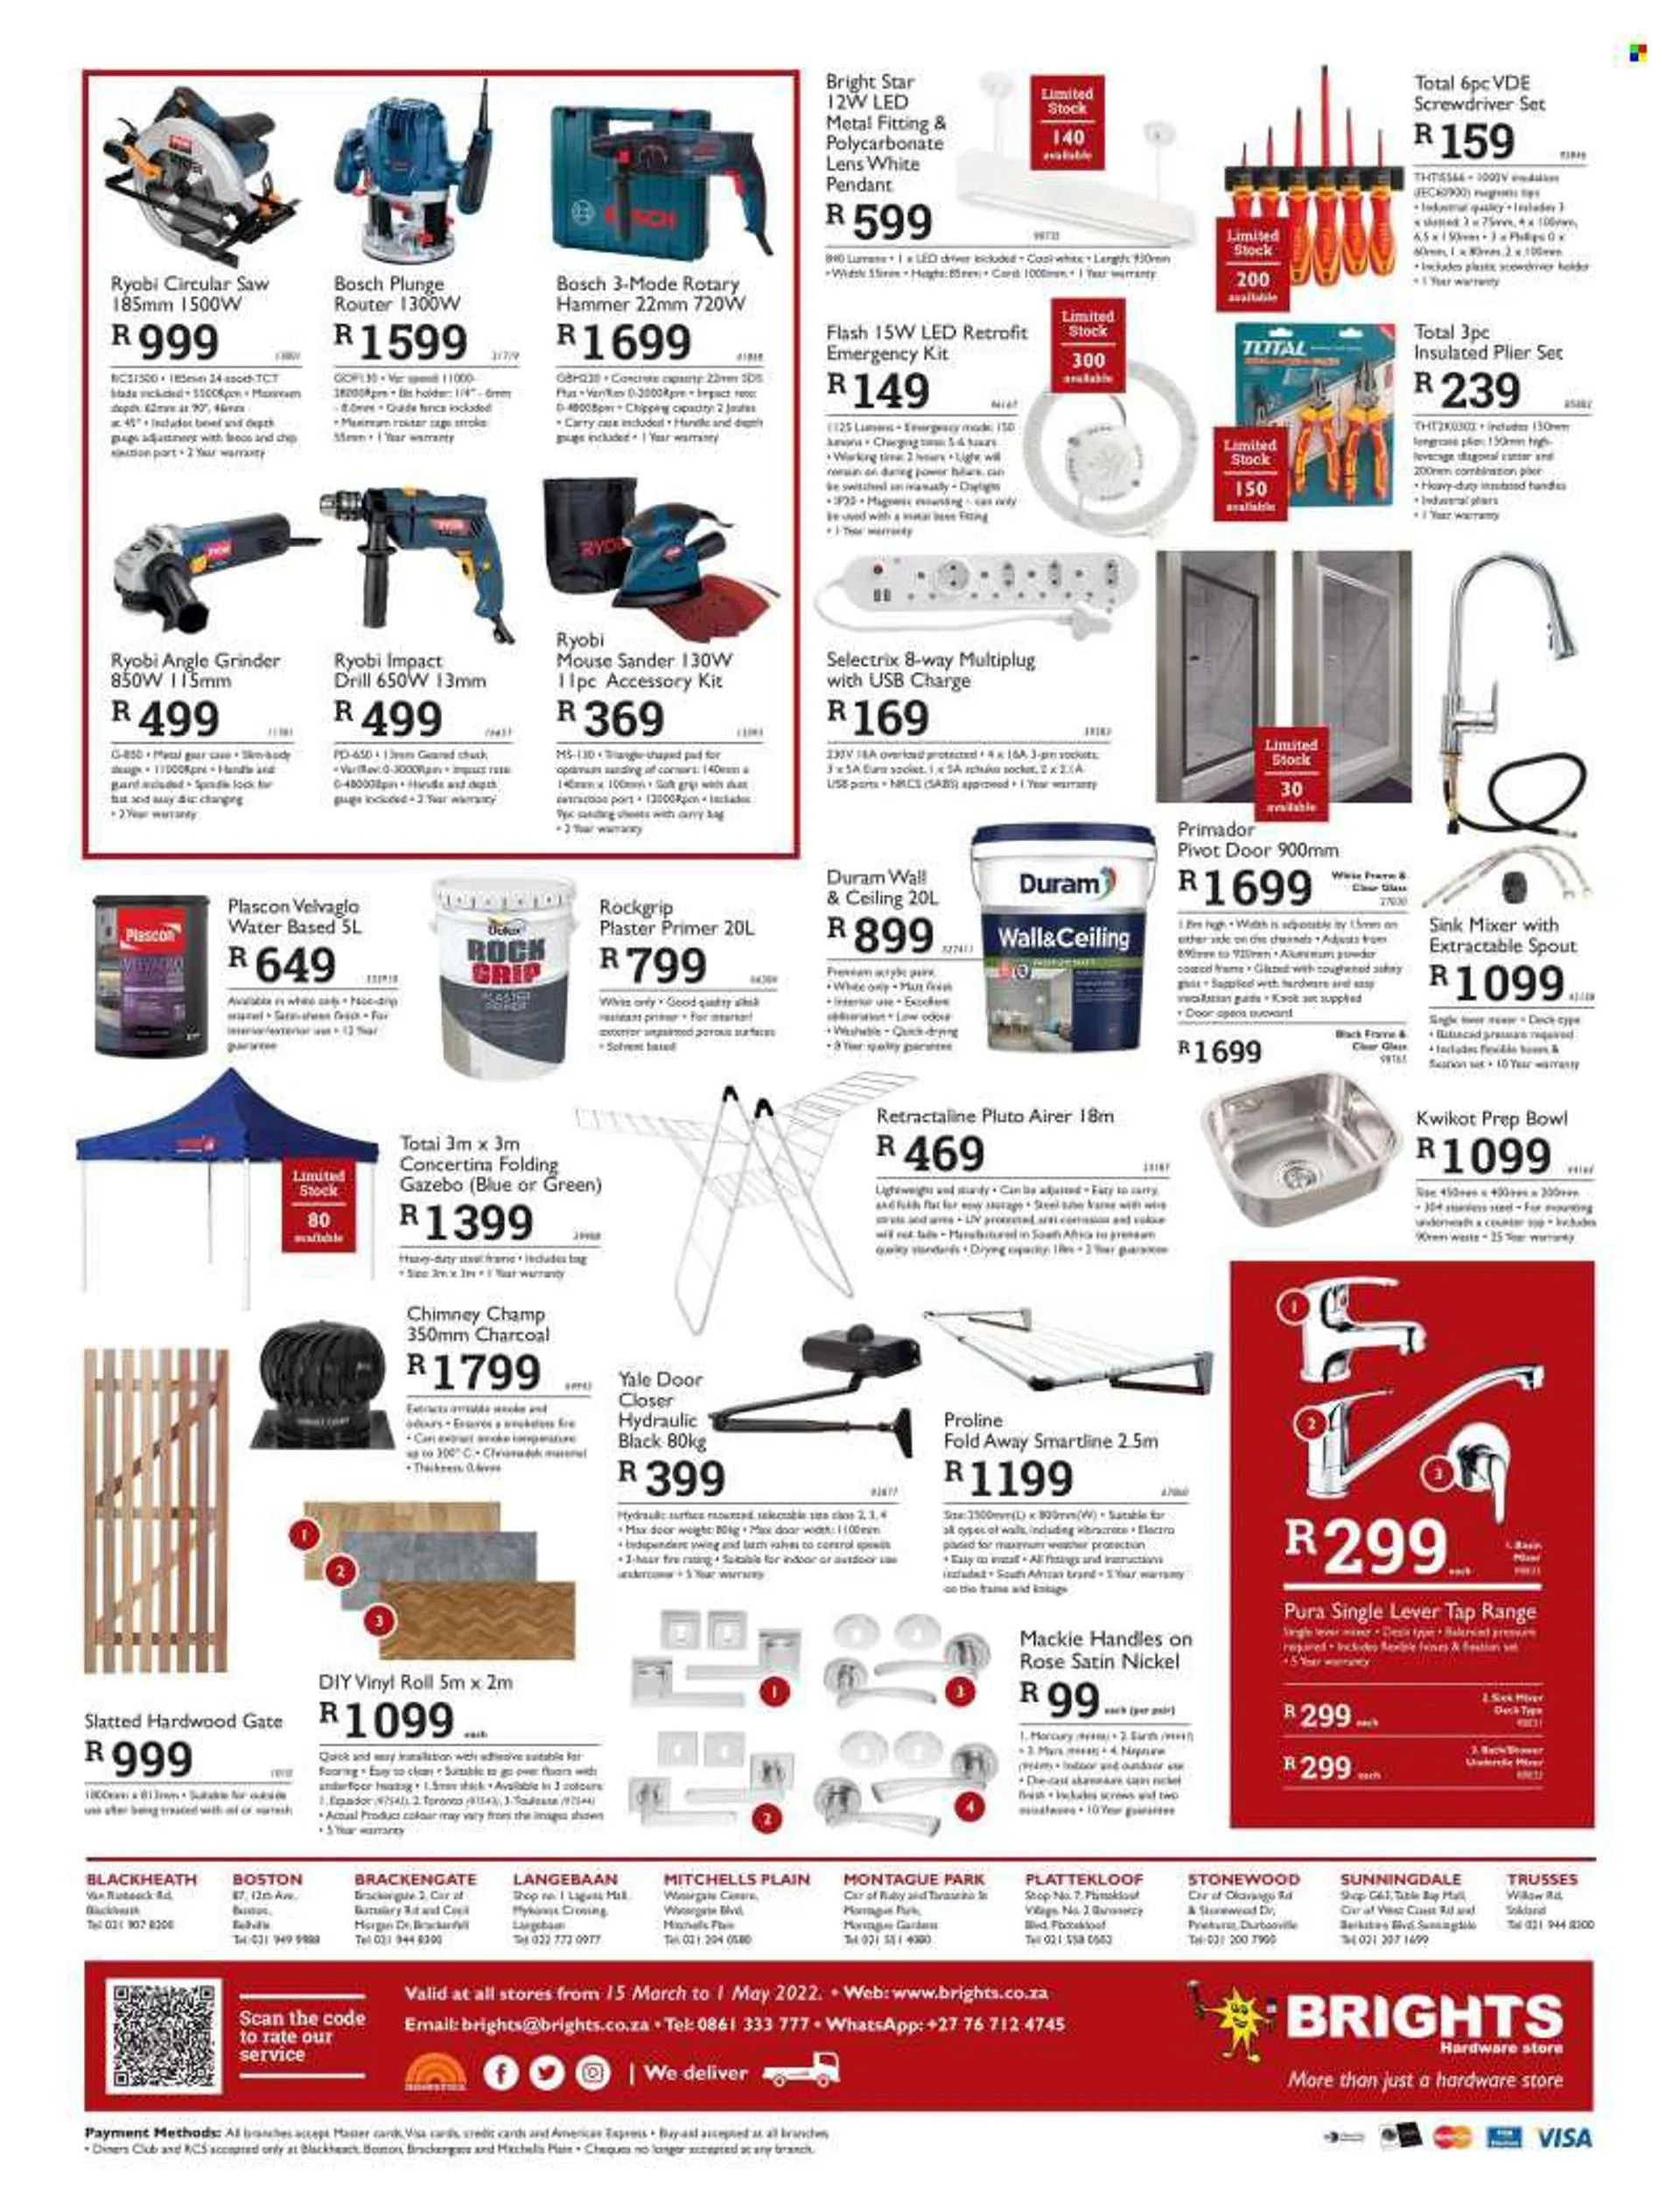 Brights Hardware catalogue  - 15/03/2022 - 01/05/2022. - 15 March 1 May 2022 - Page 2